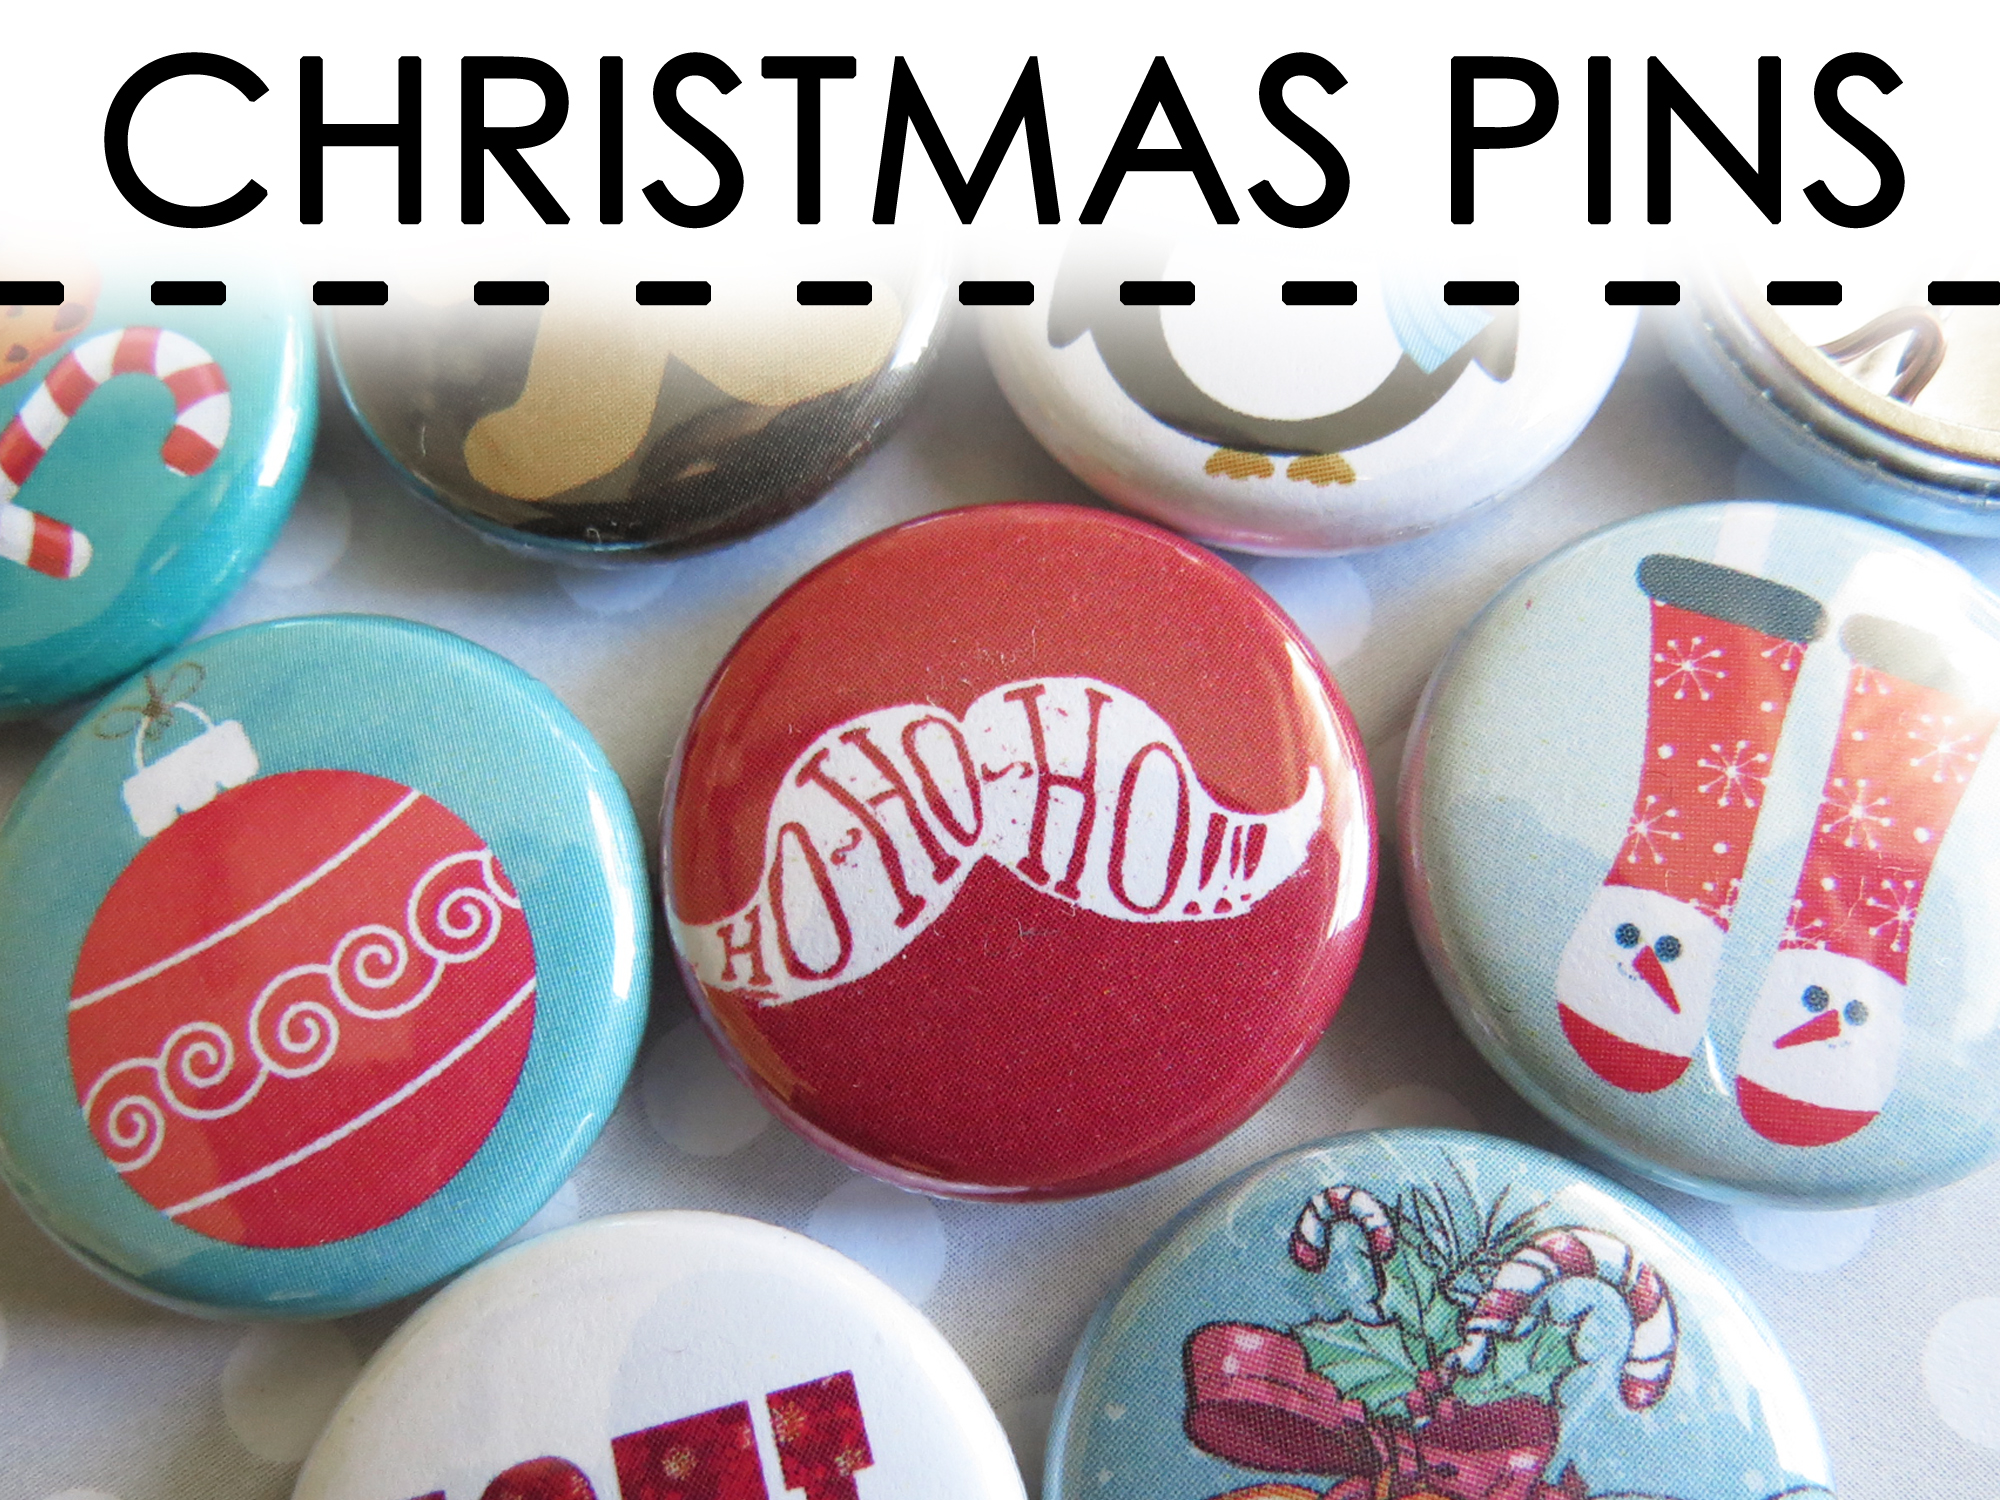 Random Christmas Buttons Pins - Small Christmas Party Gifts for Coworkers,  Favors, Decor, Decorations, Stockings - Set of 30 Mini 